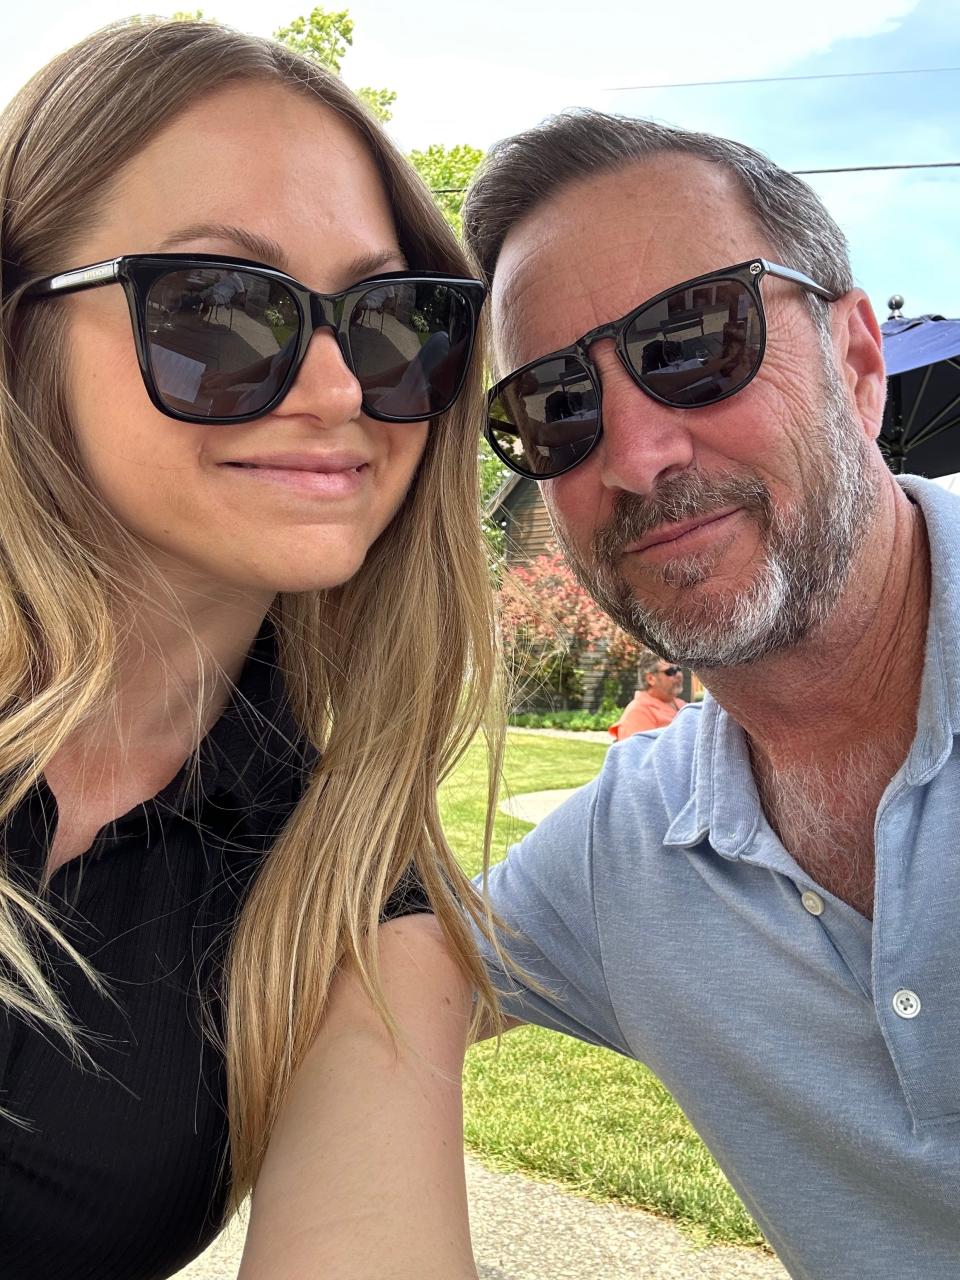 Melissa Persling and her ex-boyfriend, Jim, outside wearing sunglasses while on vacation together